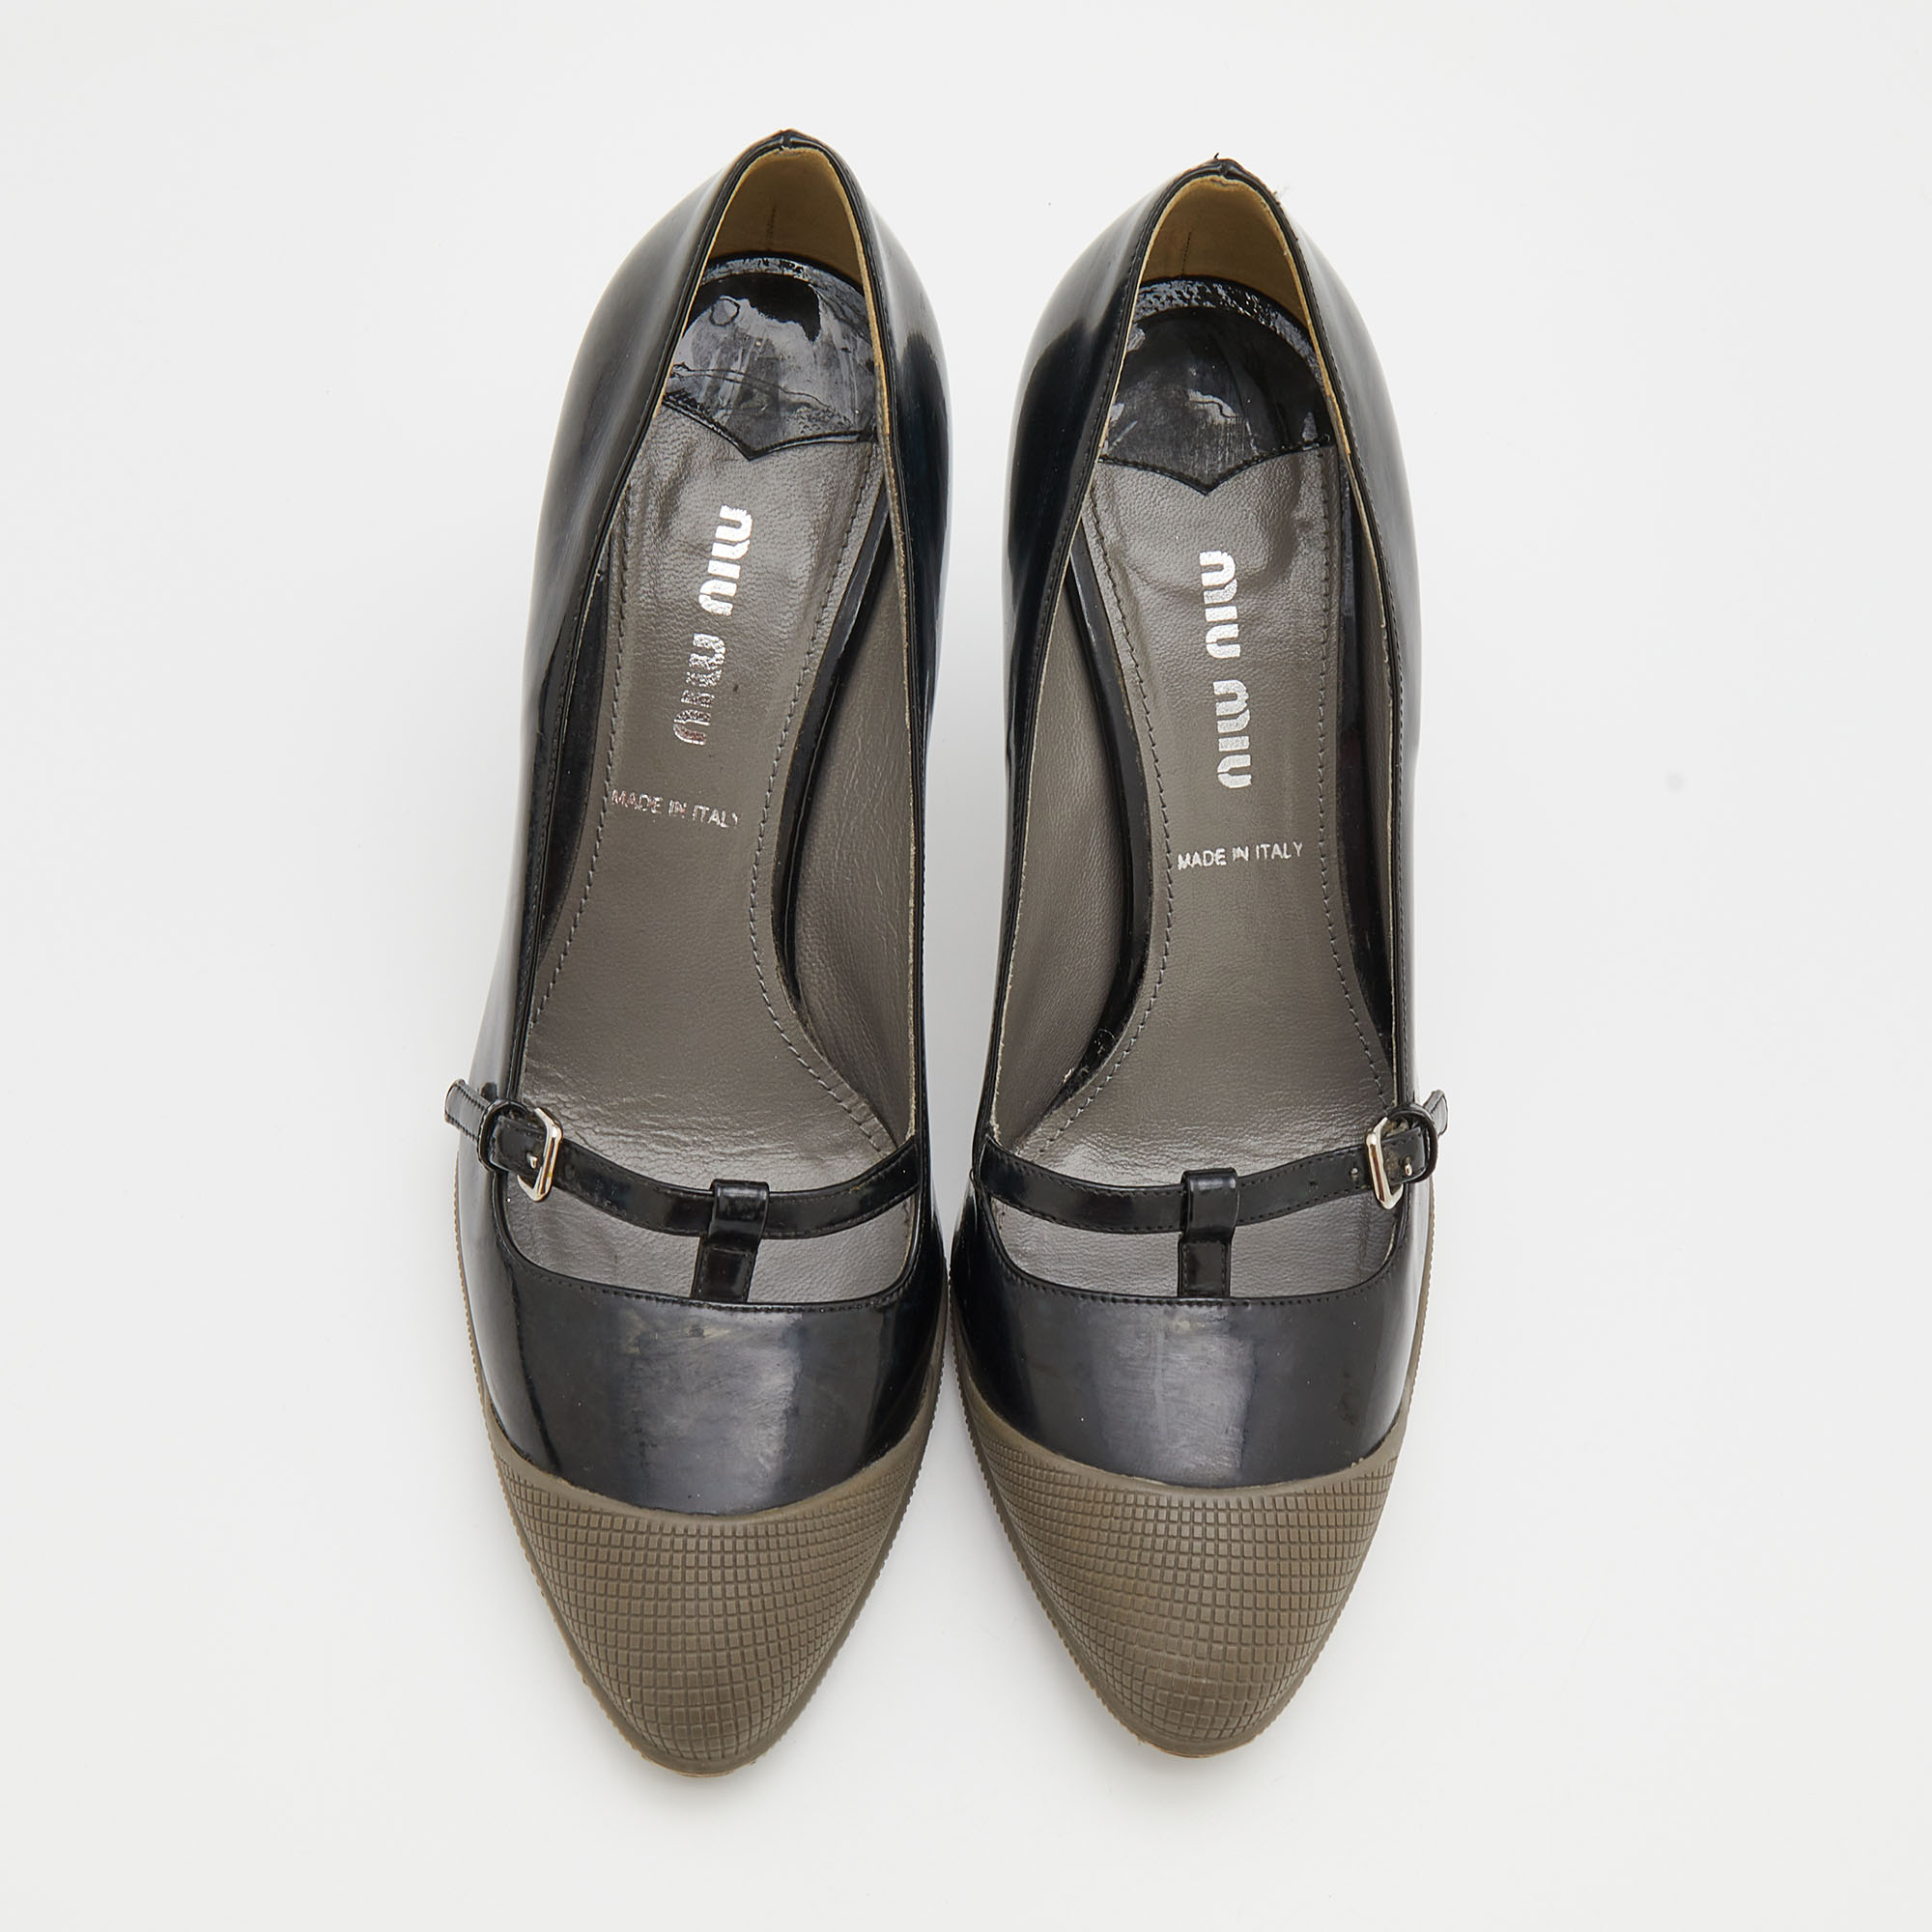 Miu Miu Black/Grey Patent Leather And Rubber Extended Cap Toe Mary Jane Pumps Size 35.5